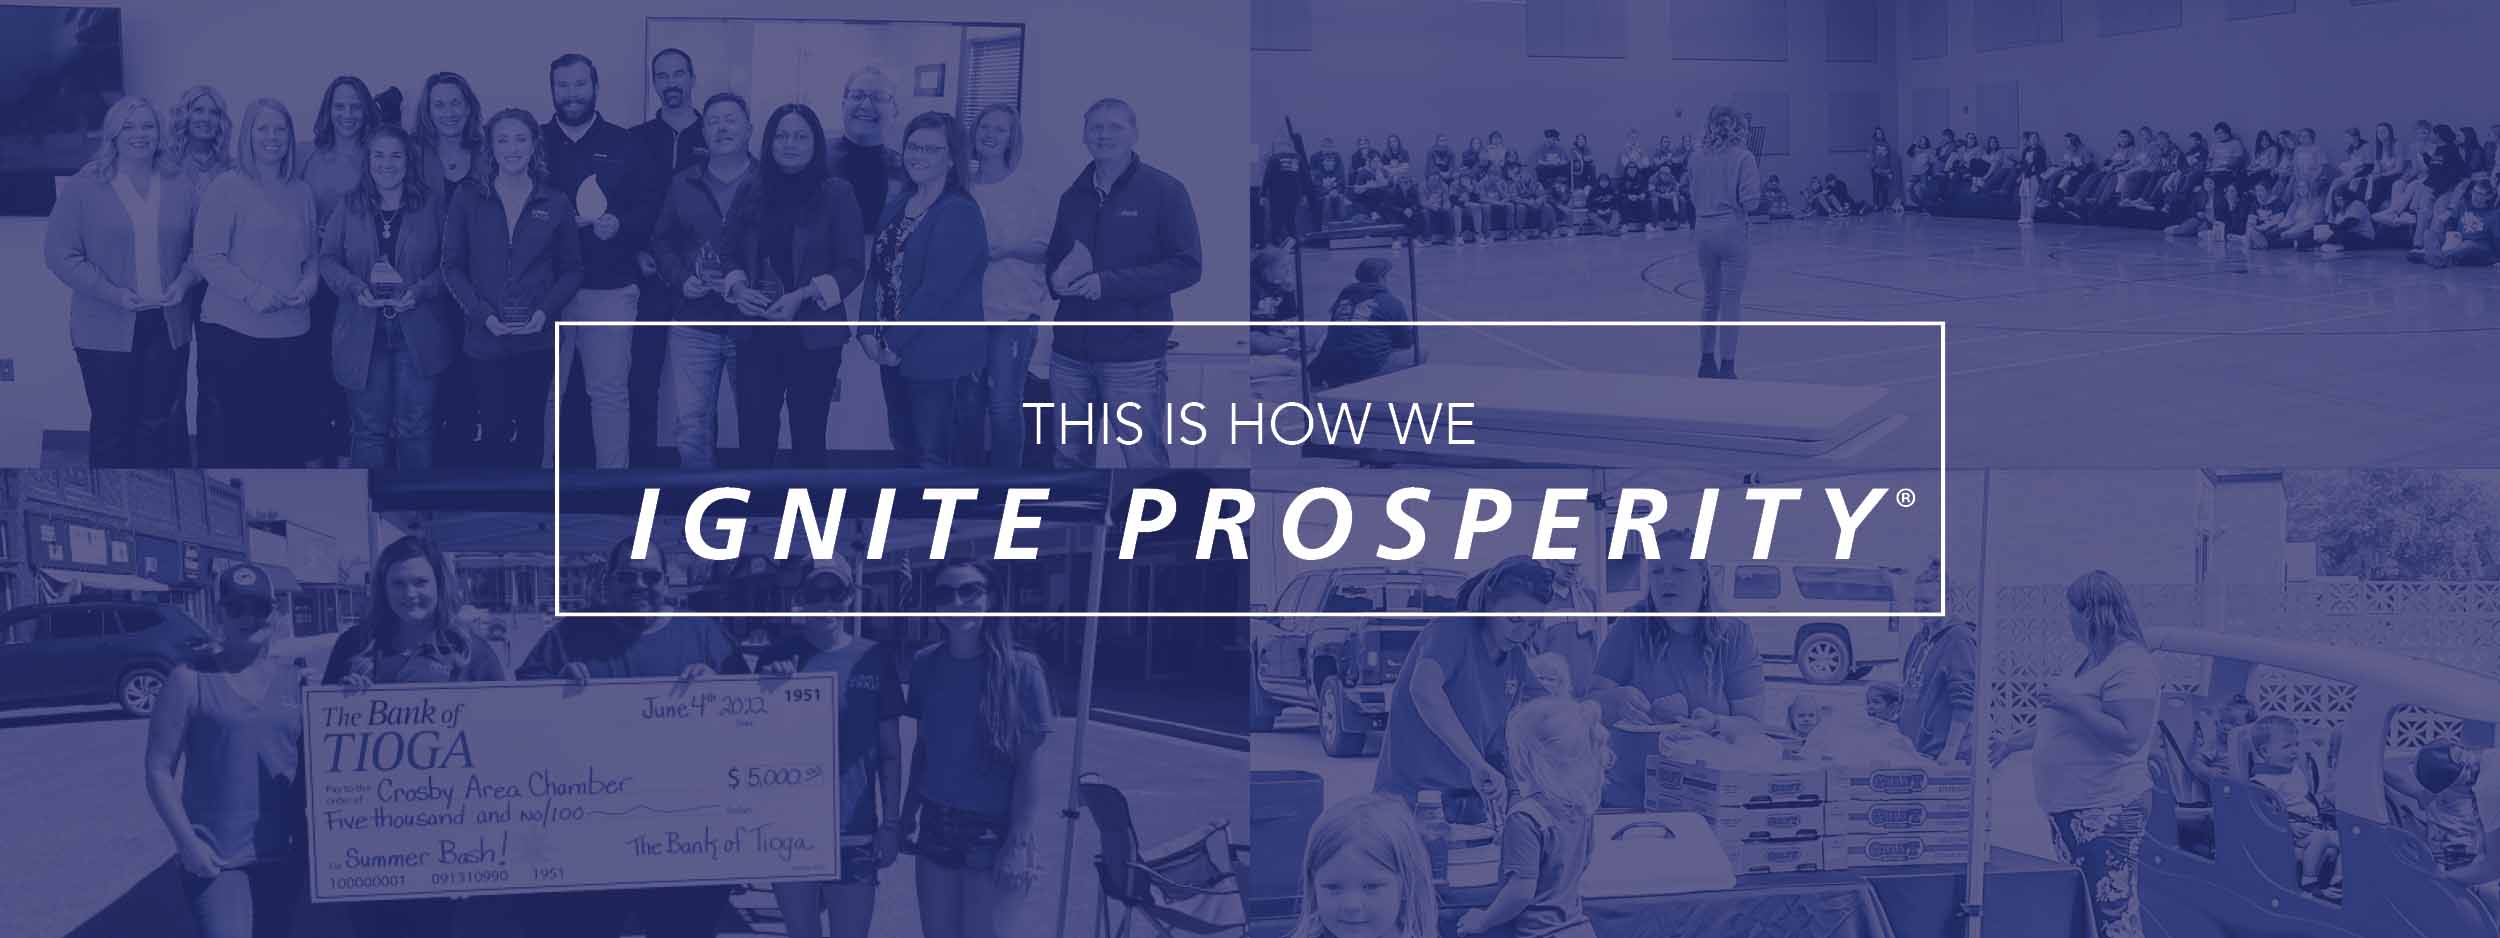 This is how we IGNITE PROSPERITY®